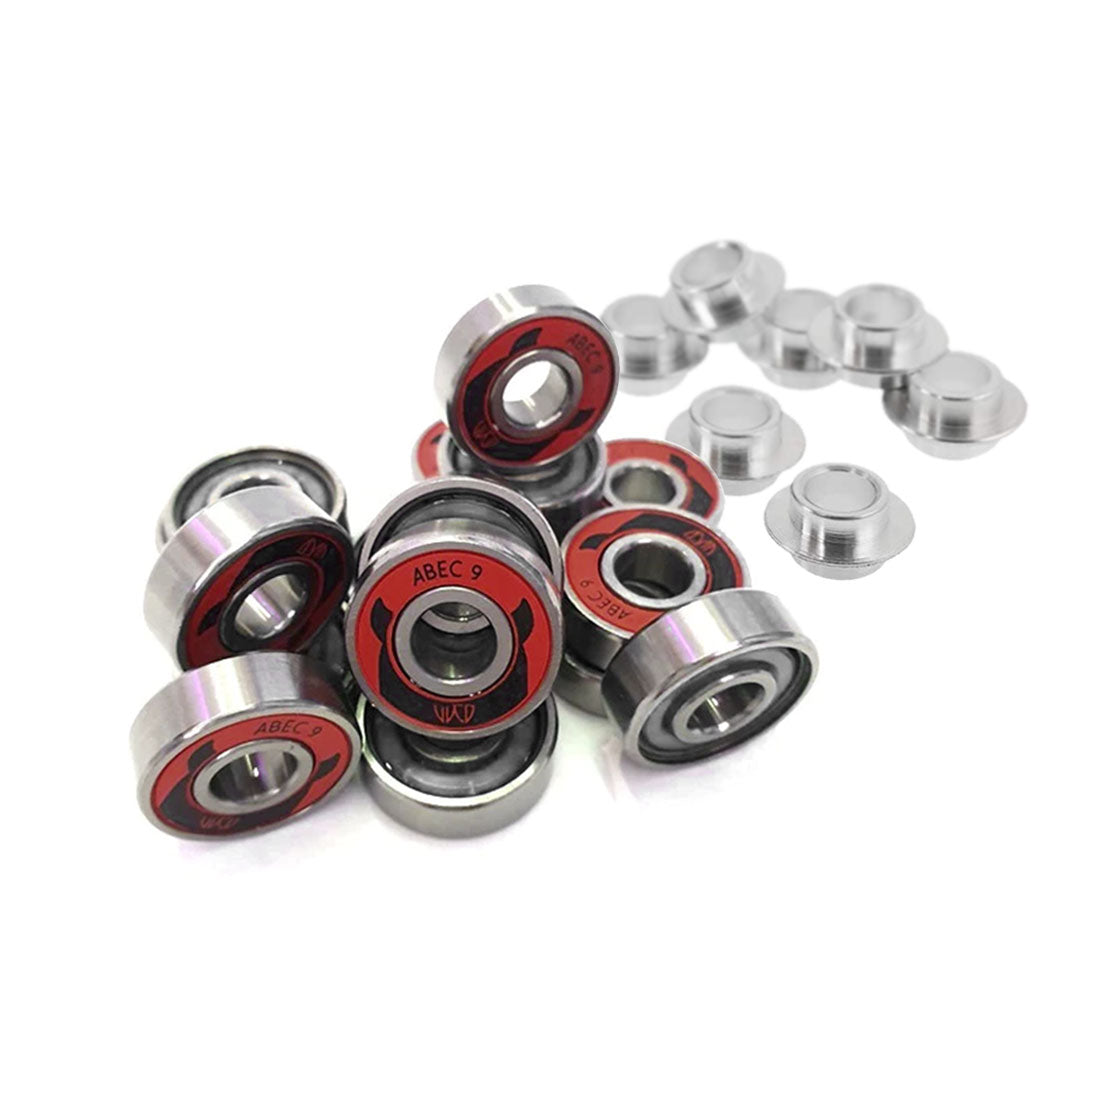 Wicked Abec 9 Bearings 16pk w/ Spacers Inline and Quad Bearings